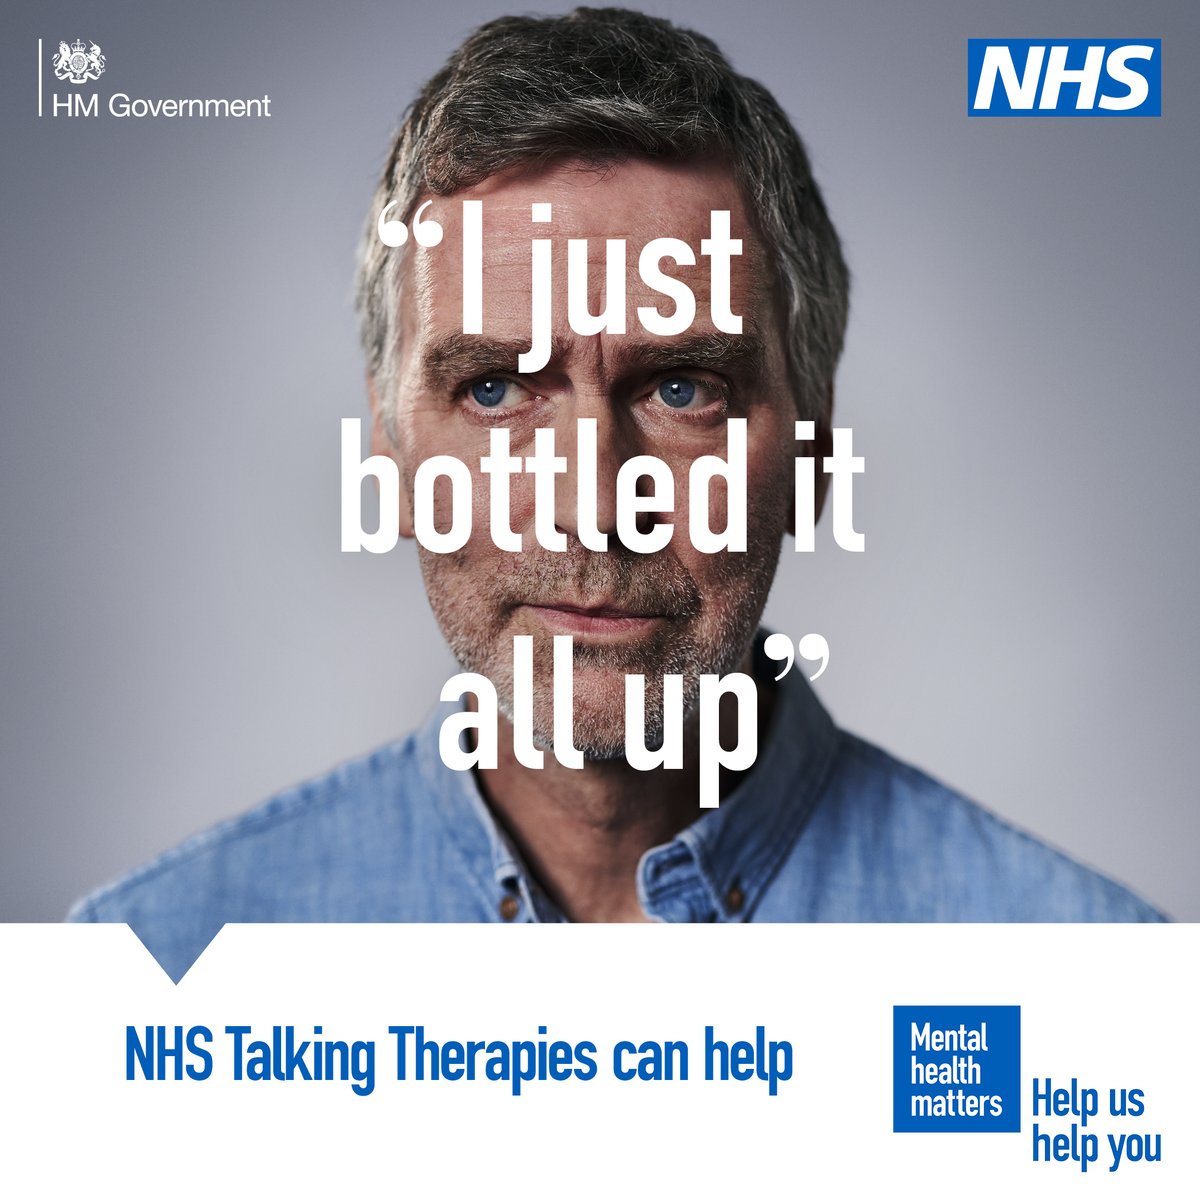 Struggling with feelings of depression, excessive worry, social anxiety, post-traumatic stress or obsessions and compulsions? NHS Talking Therapies can help. The service is effective, confidential and free. Your GP can refer you or refer yourself at nhs.uk/talk